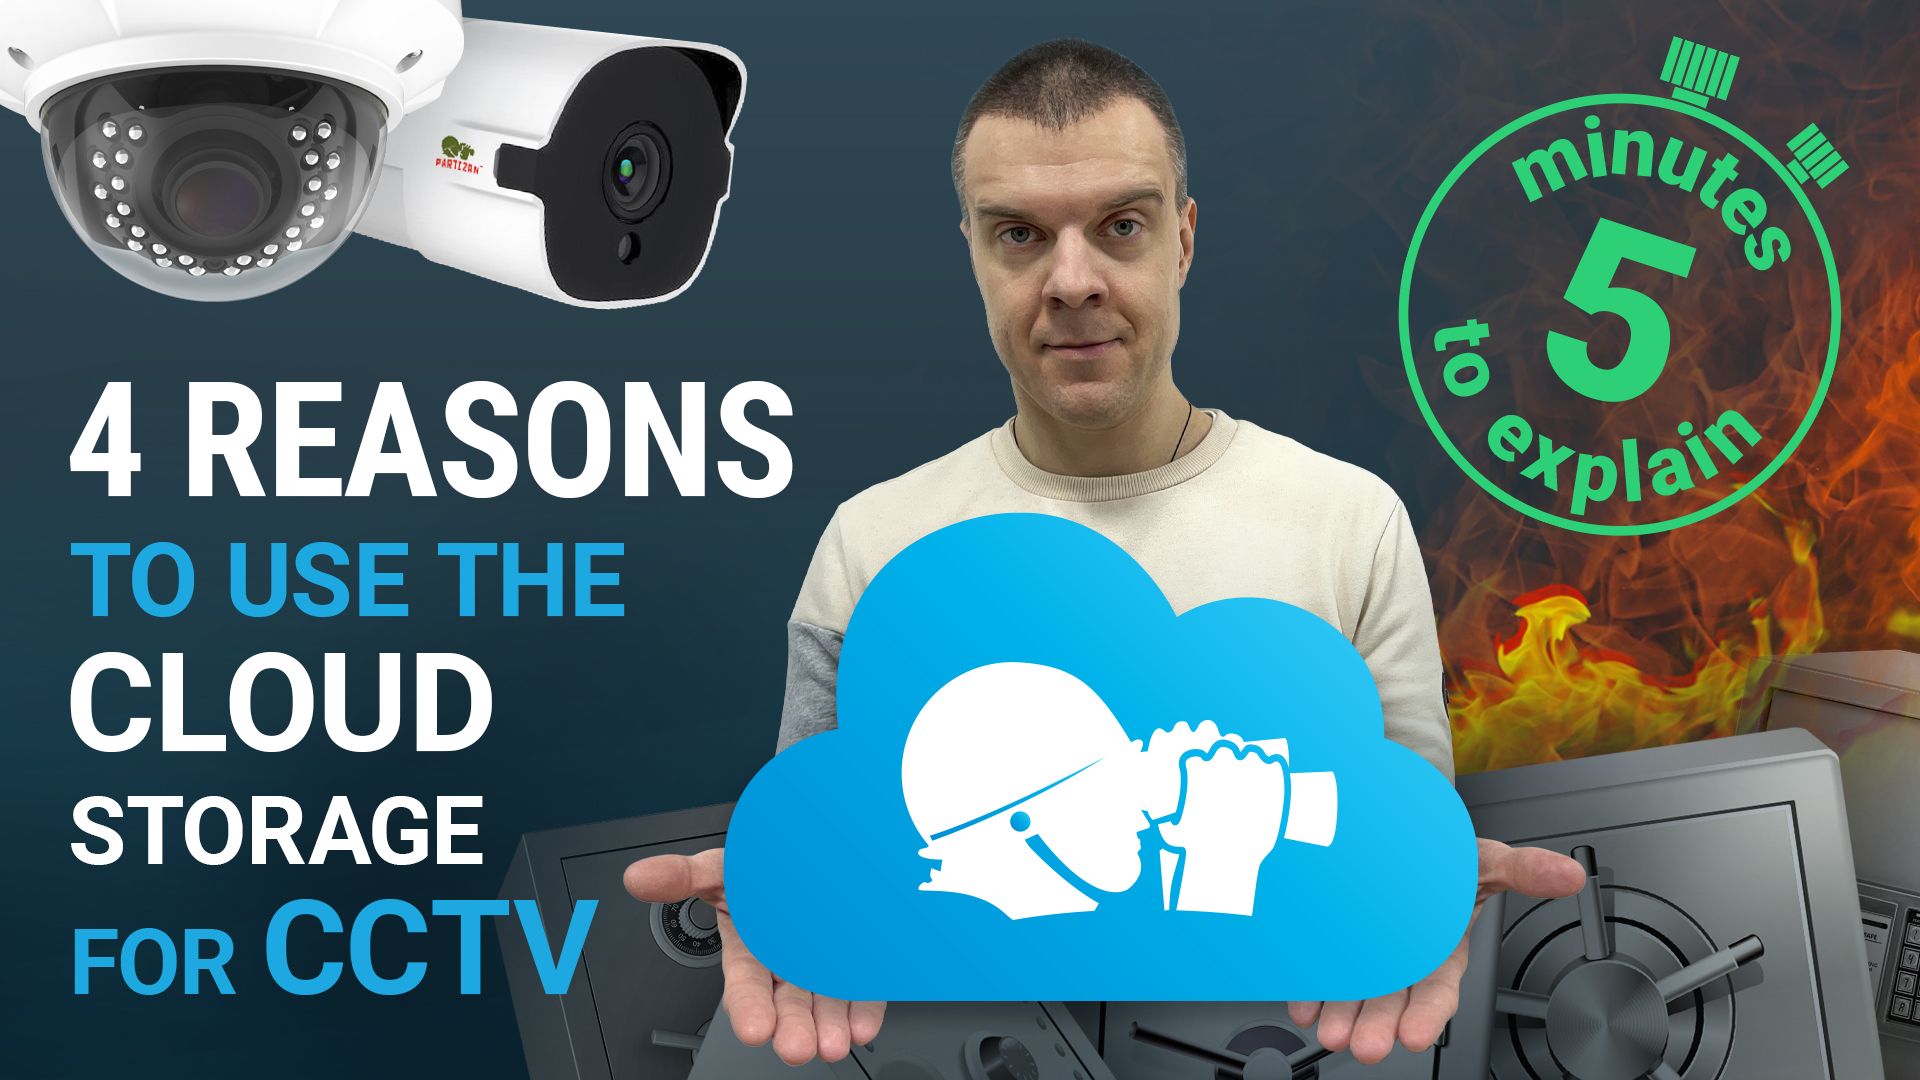 4 reasons to use the cloud storage for CCTV: Partizan Cloud